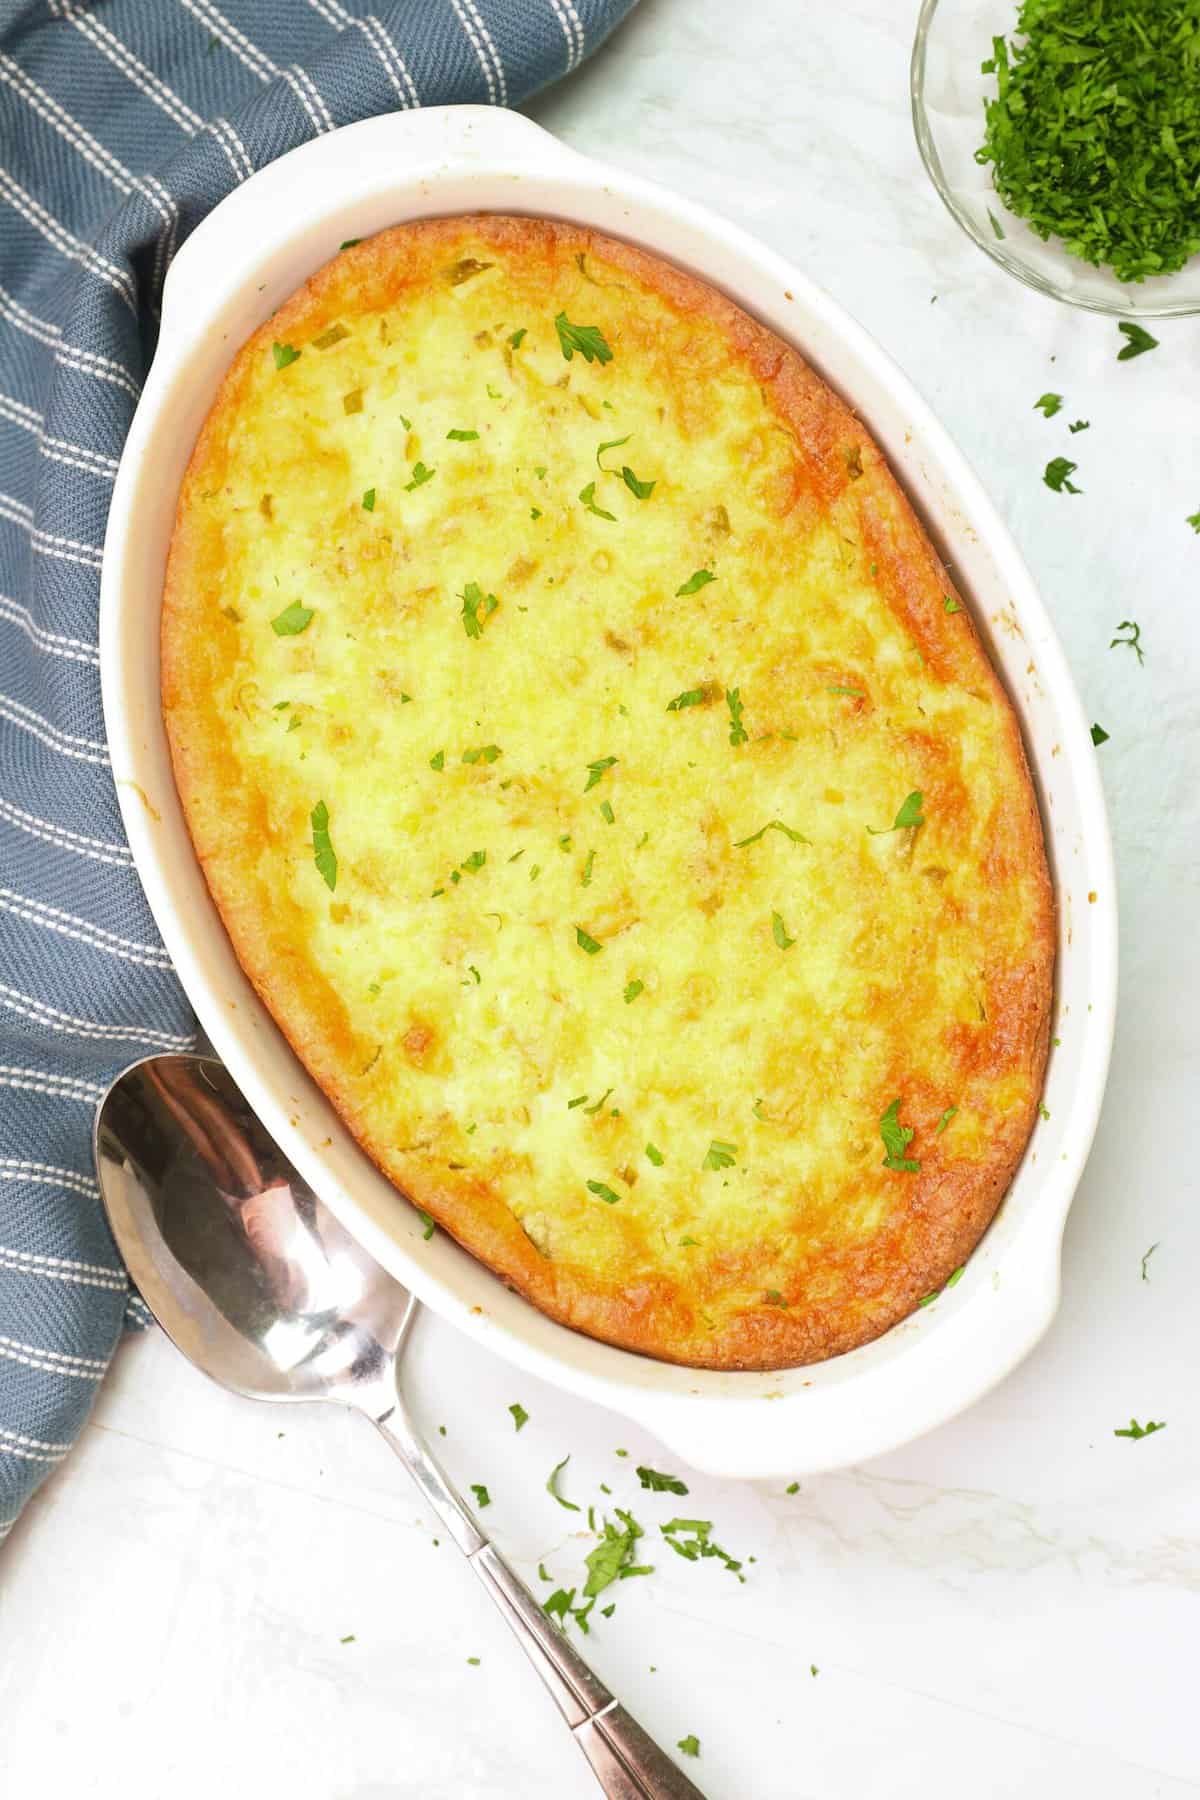 Delicious corn pudding that fills your heart